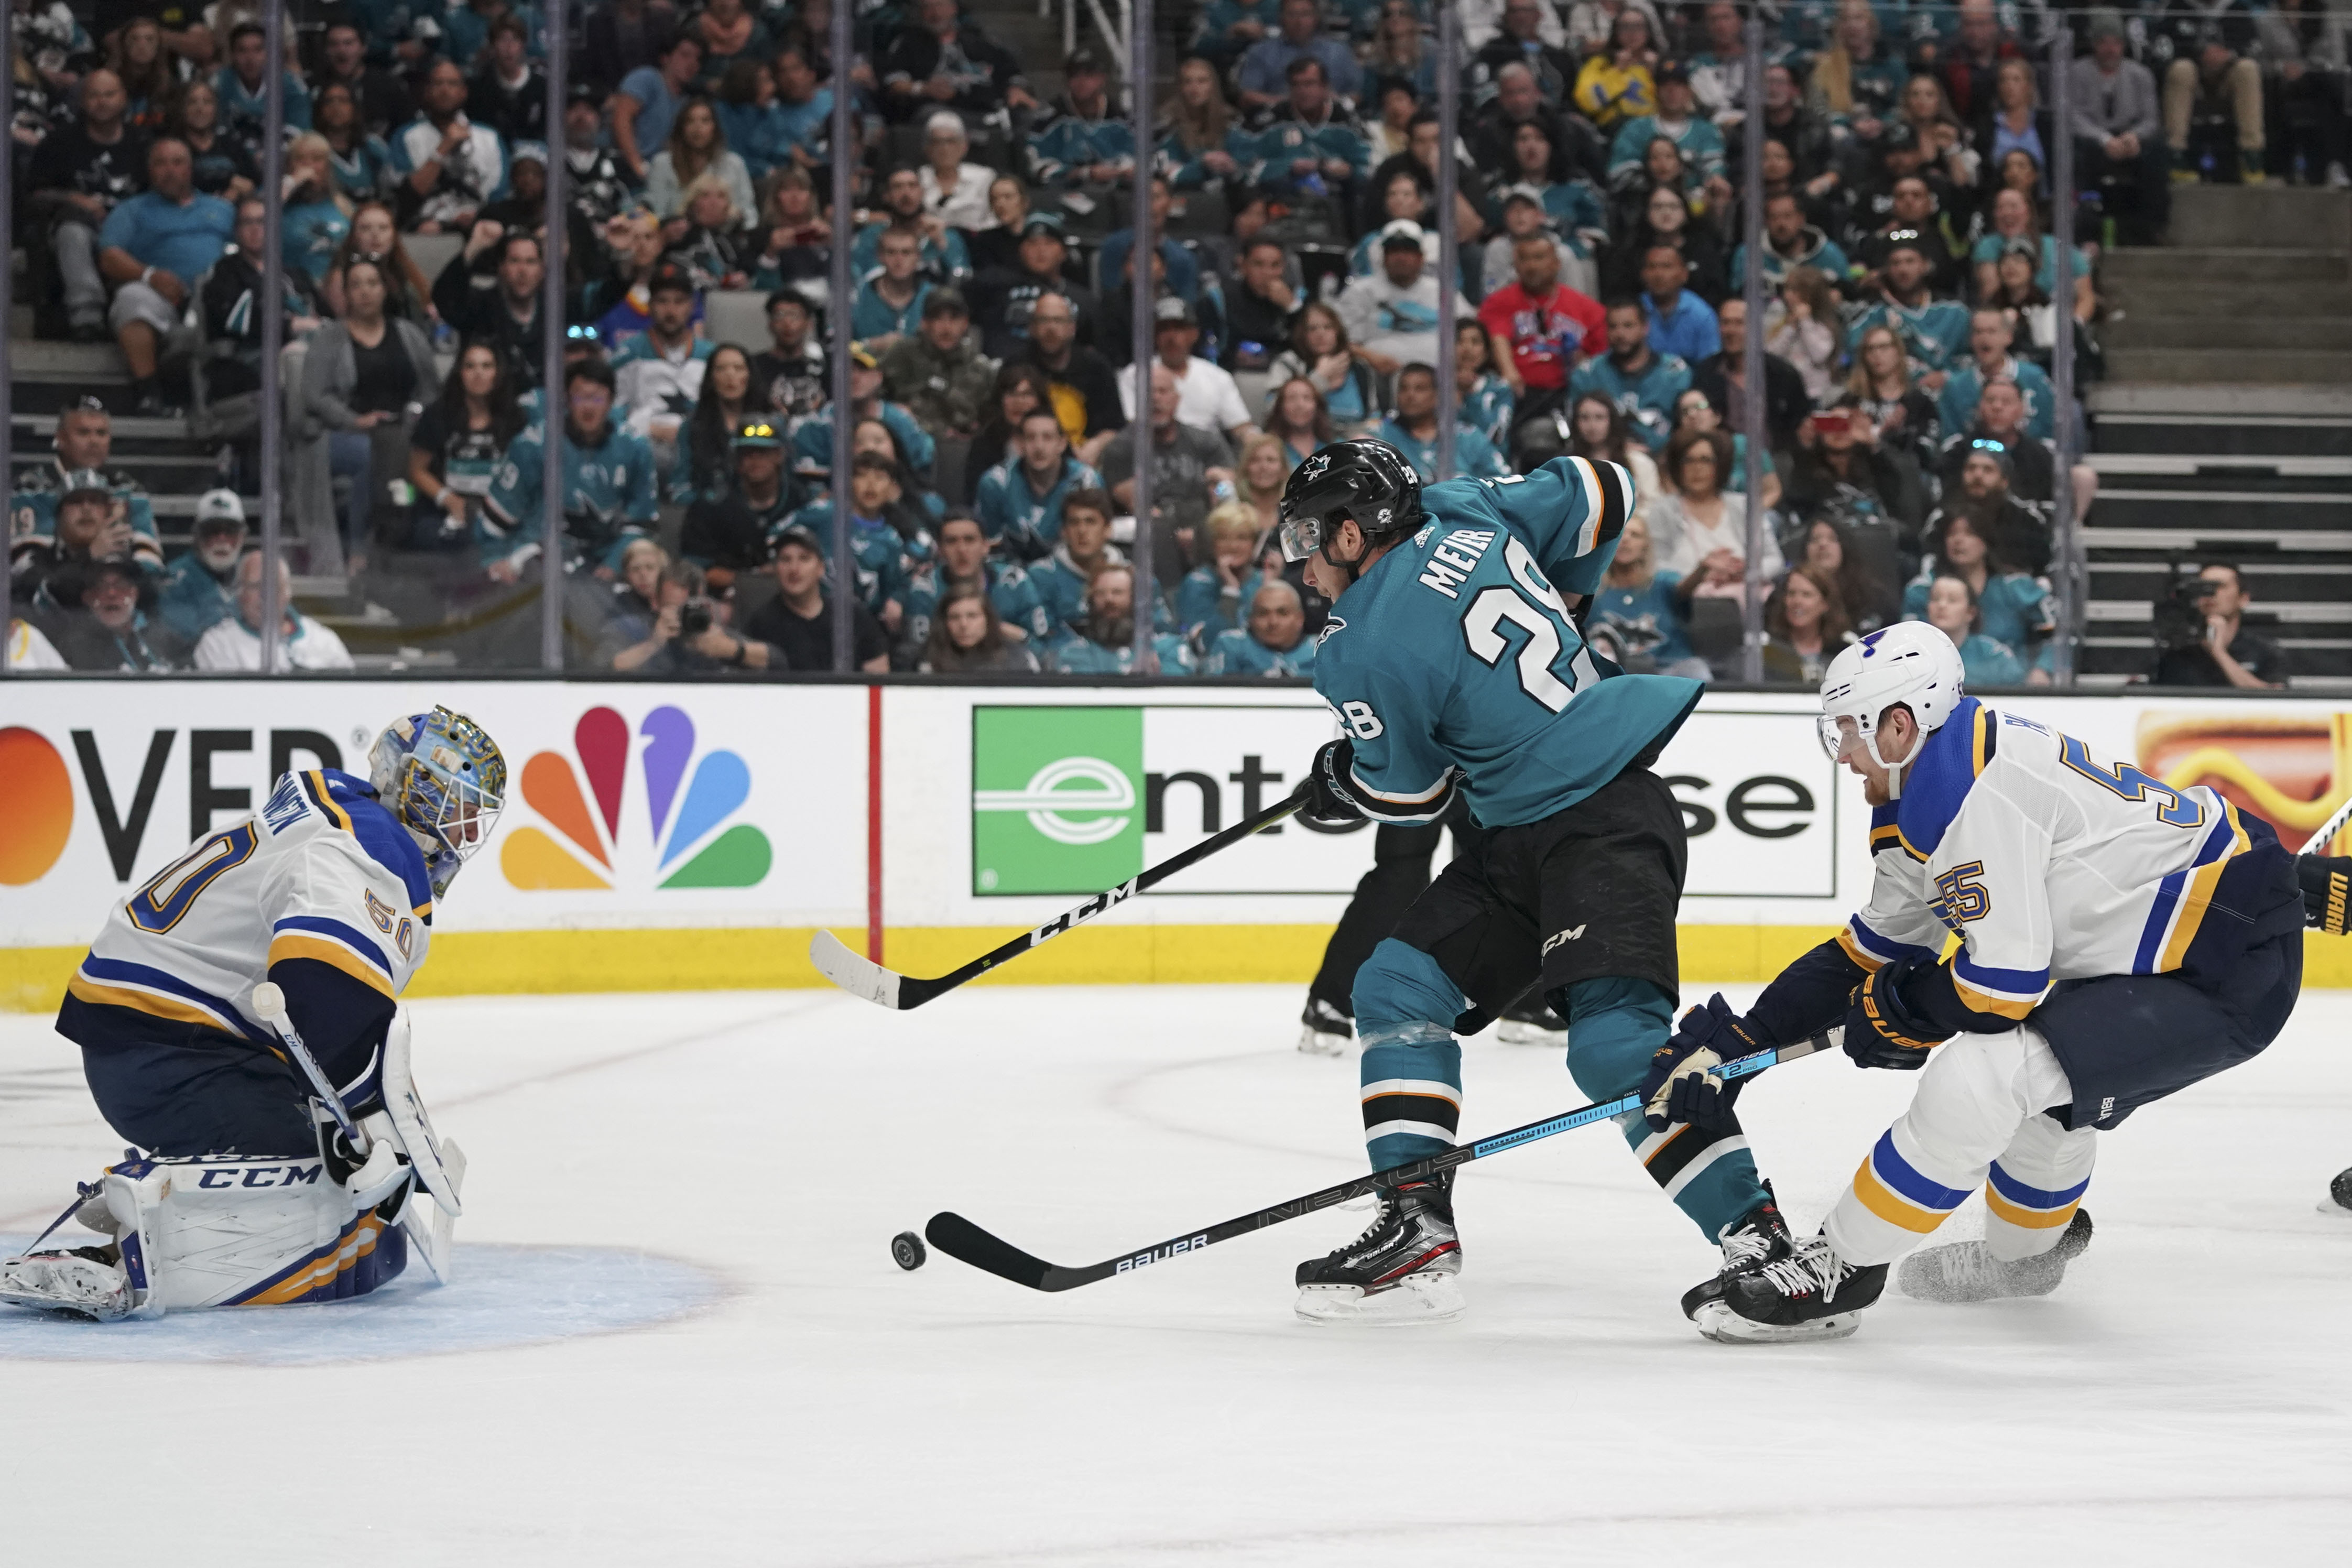 2019-05-12T020412Z_296853942_NOCID_RTRMADP_3_NHL-STANLEY-CUP-PLAYOFFS-ST-LOUIS-BLUES-AT-SAN-JOSE-SHARKS